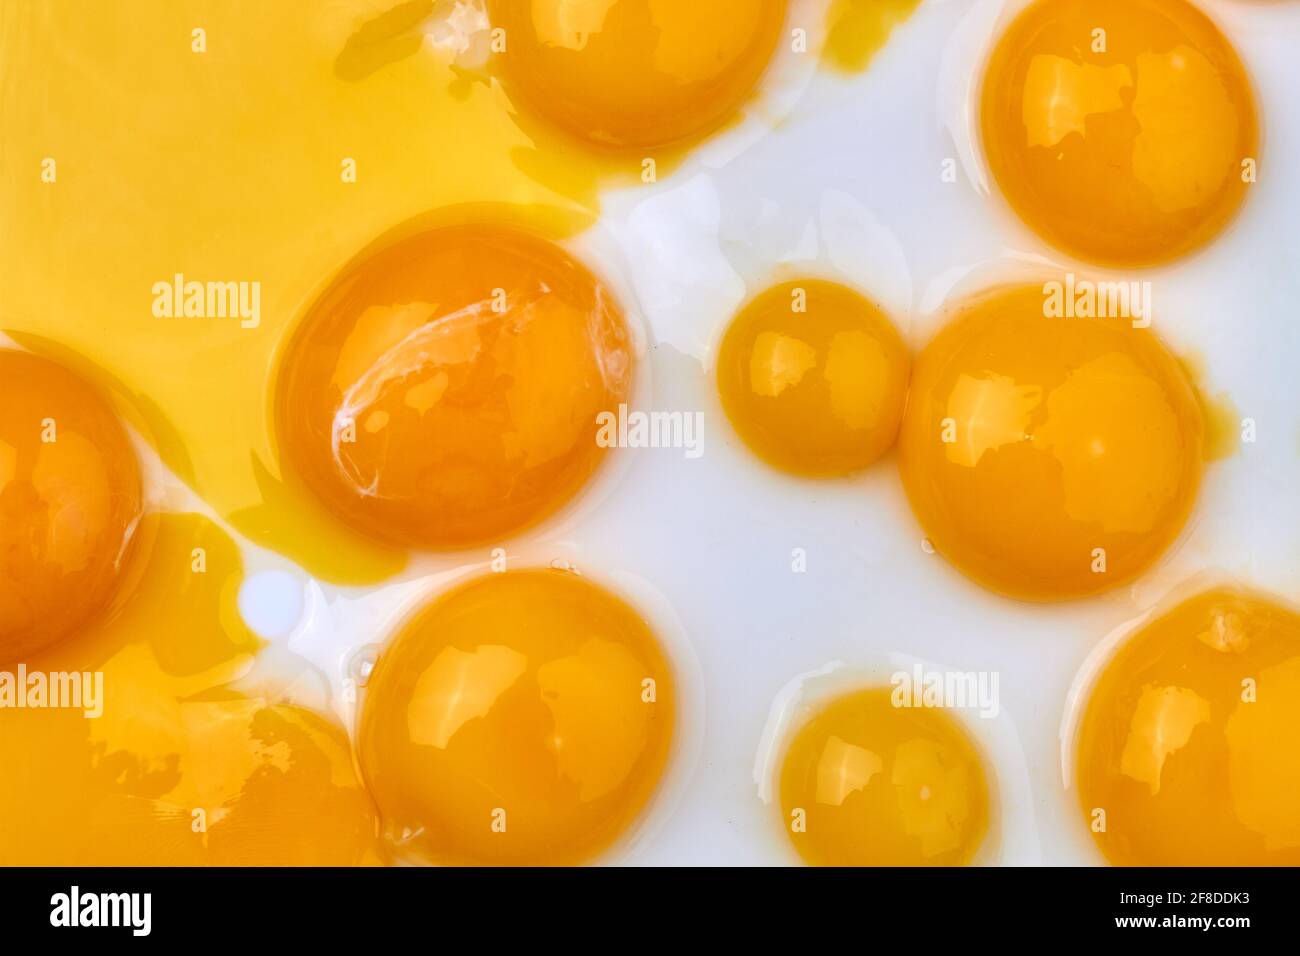 Top view chicken egg yelks on white surface. Stock Photo